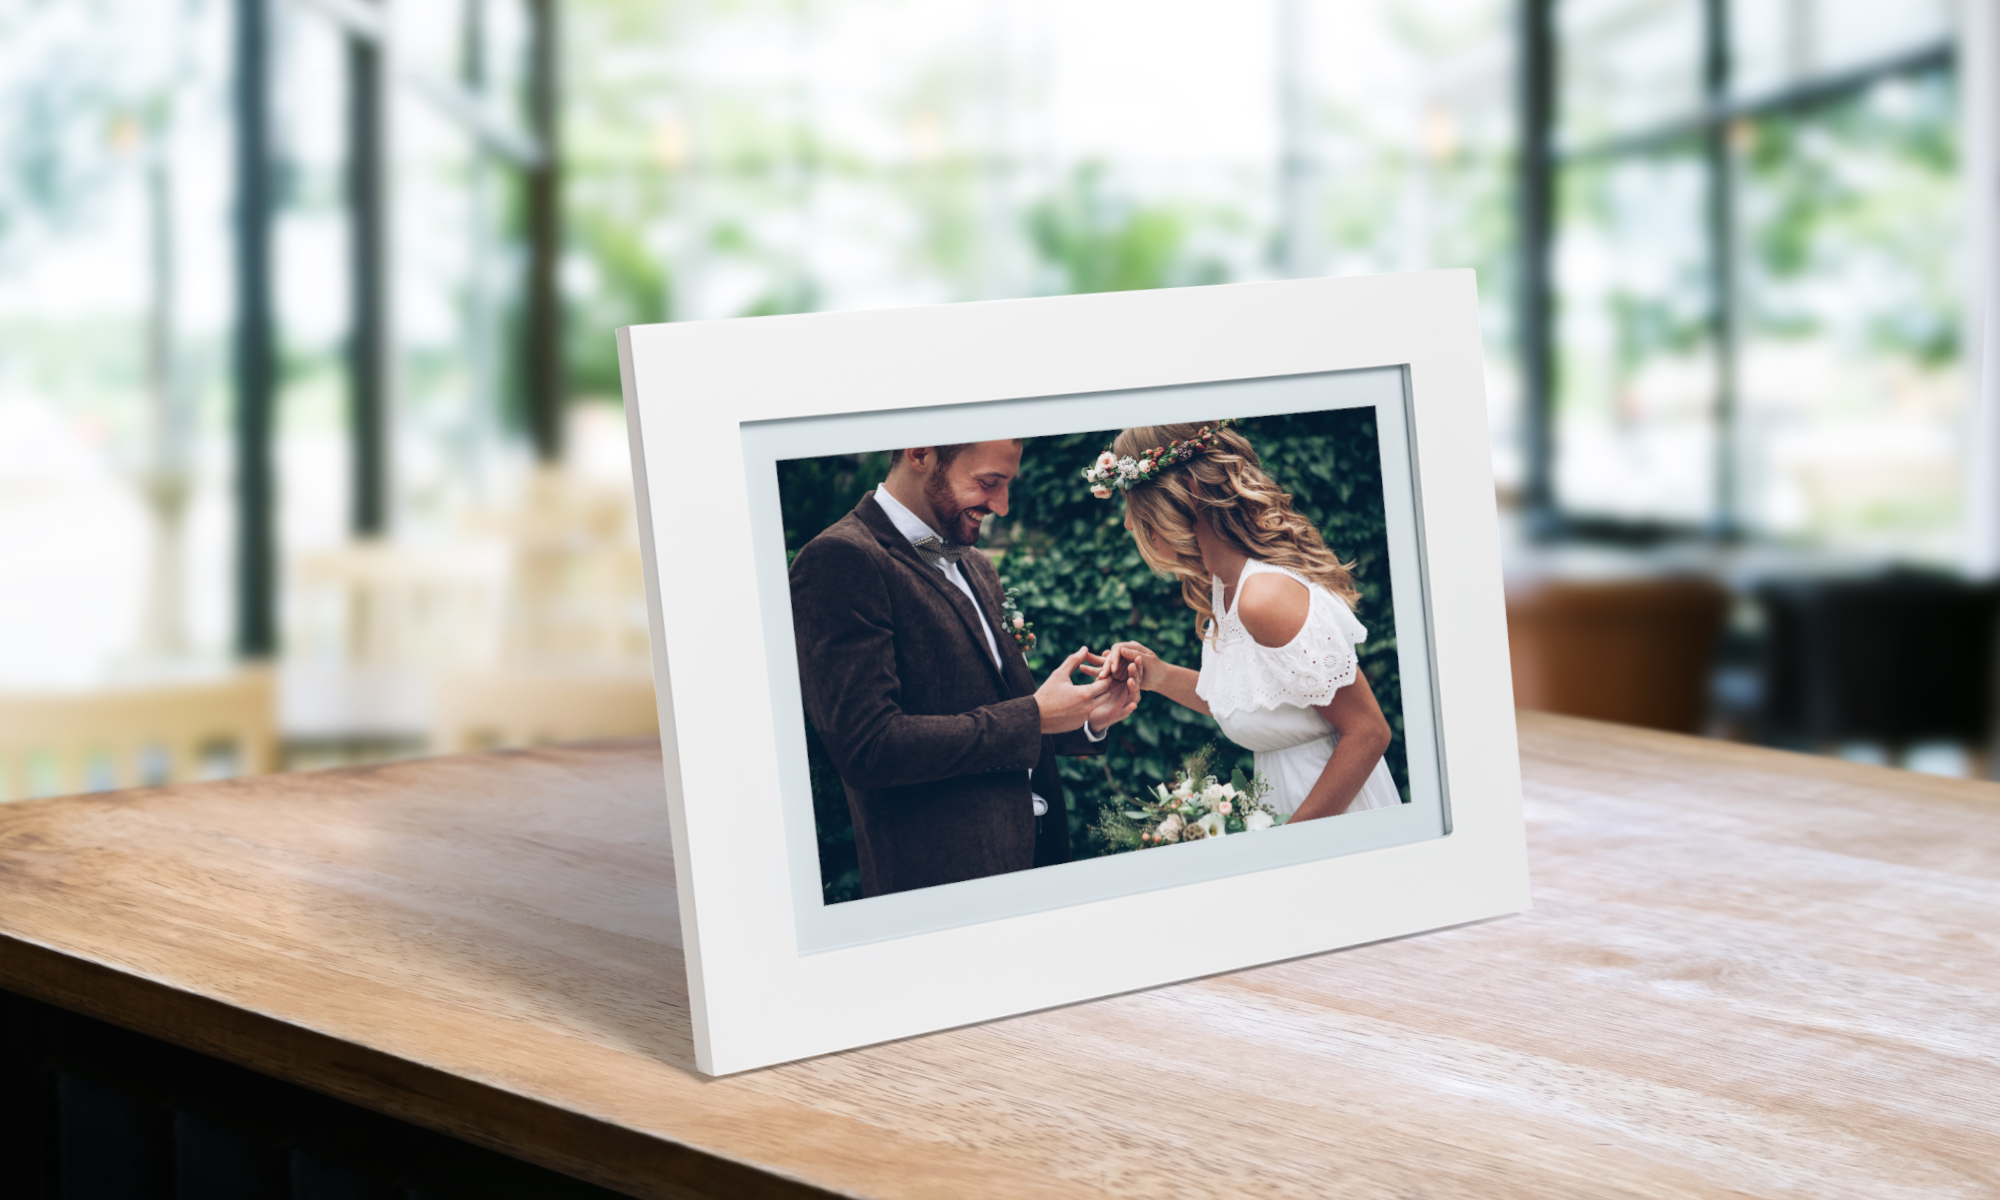 On the white digital Photospring frame, there is a groom proposing to the bride with a tree behind them.